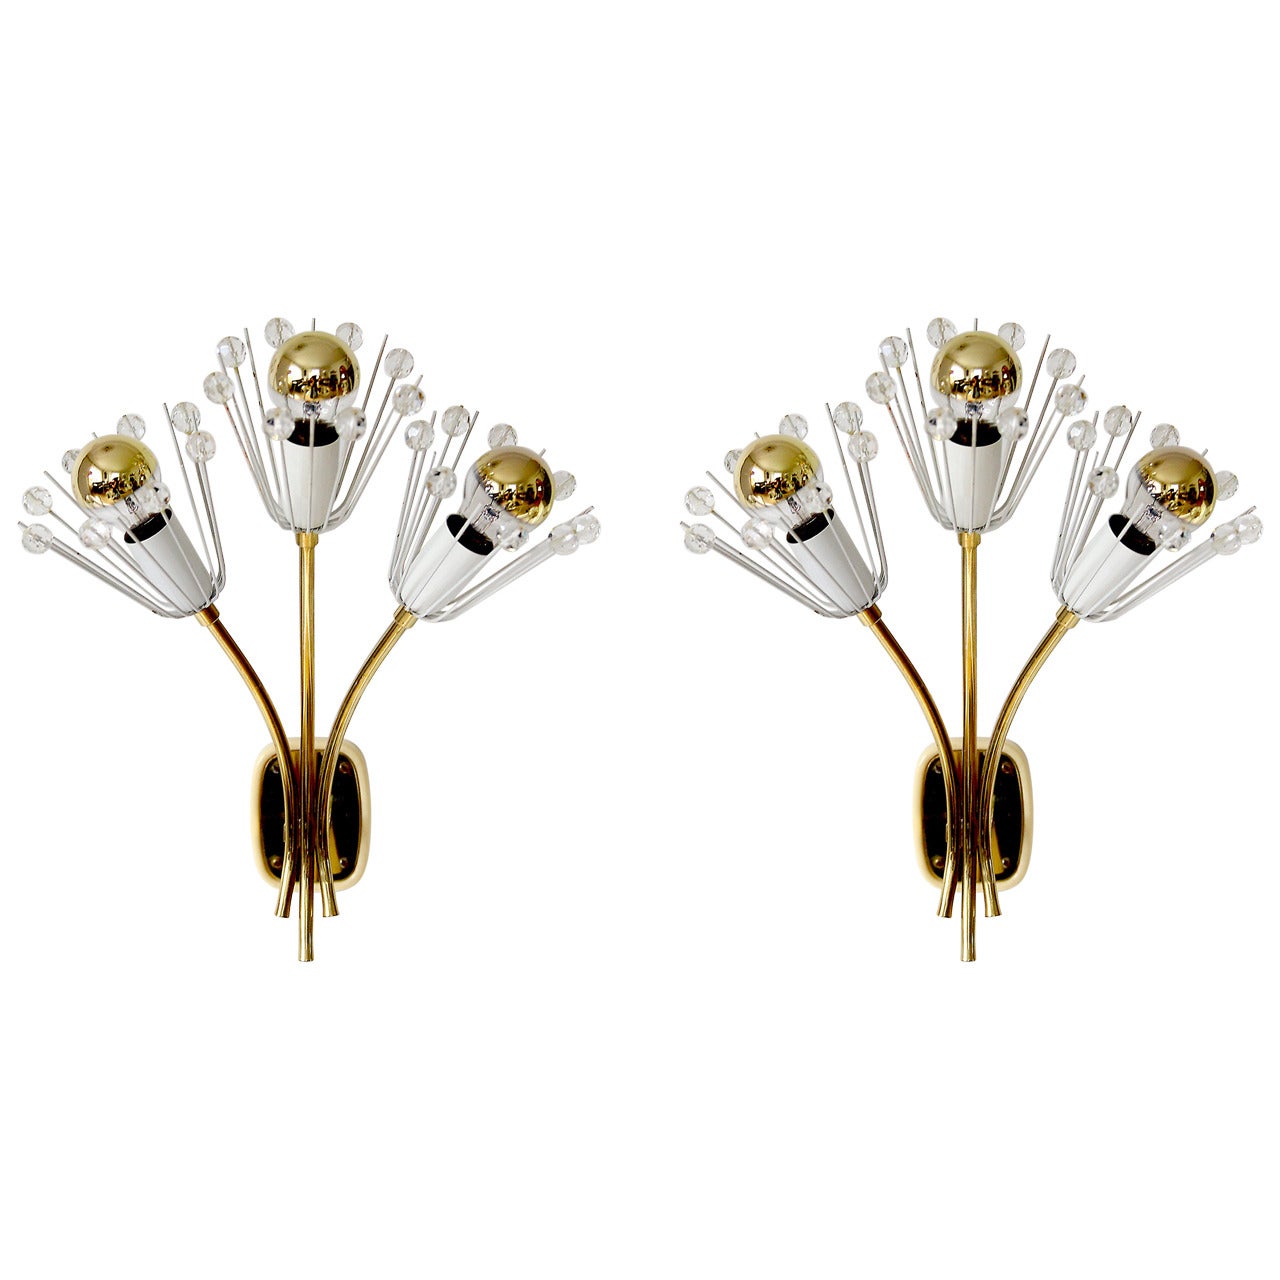 Pair of Brass Glass Sconces by Emil Stejnar for Rupert Nikoll, Vienna, 1950s For Sale